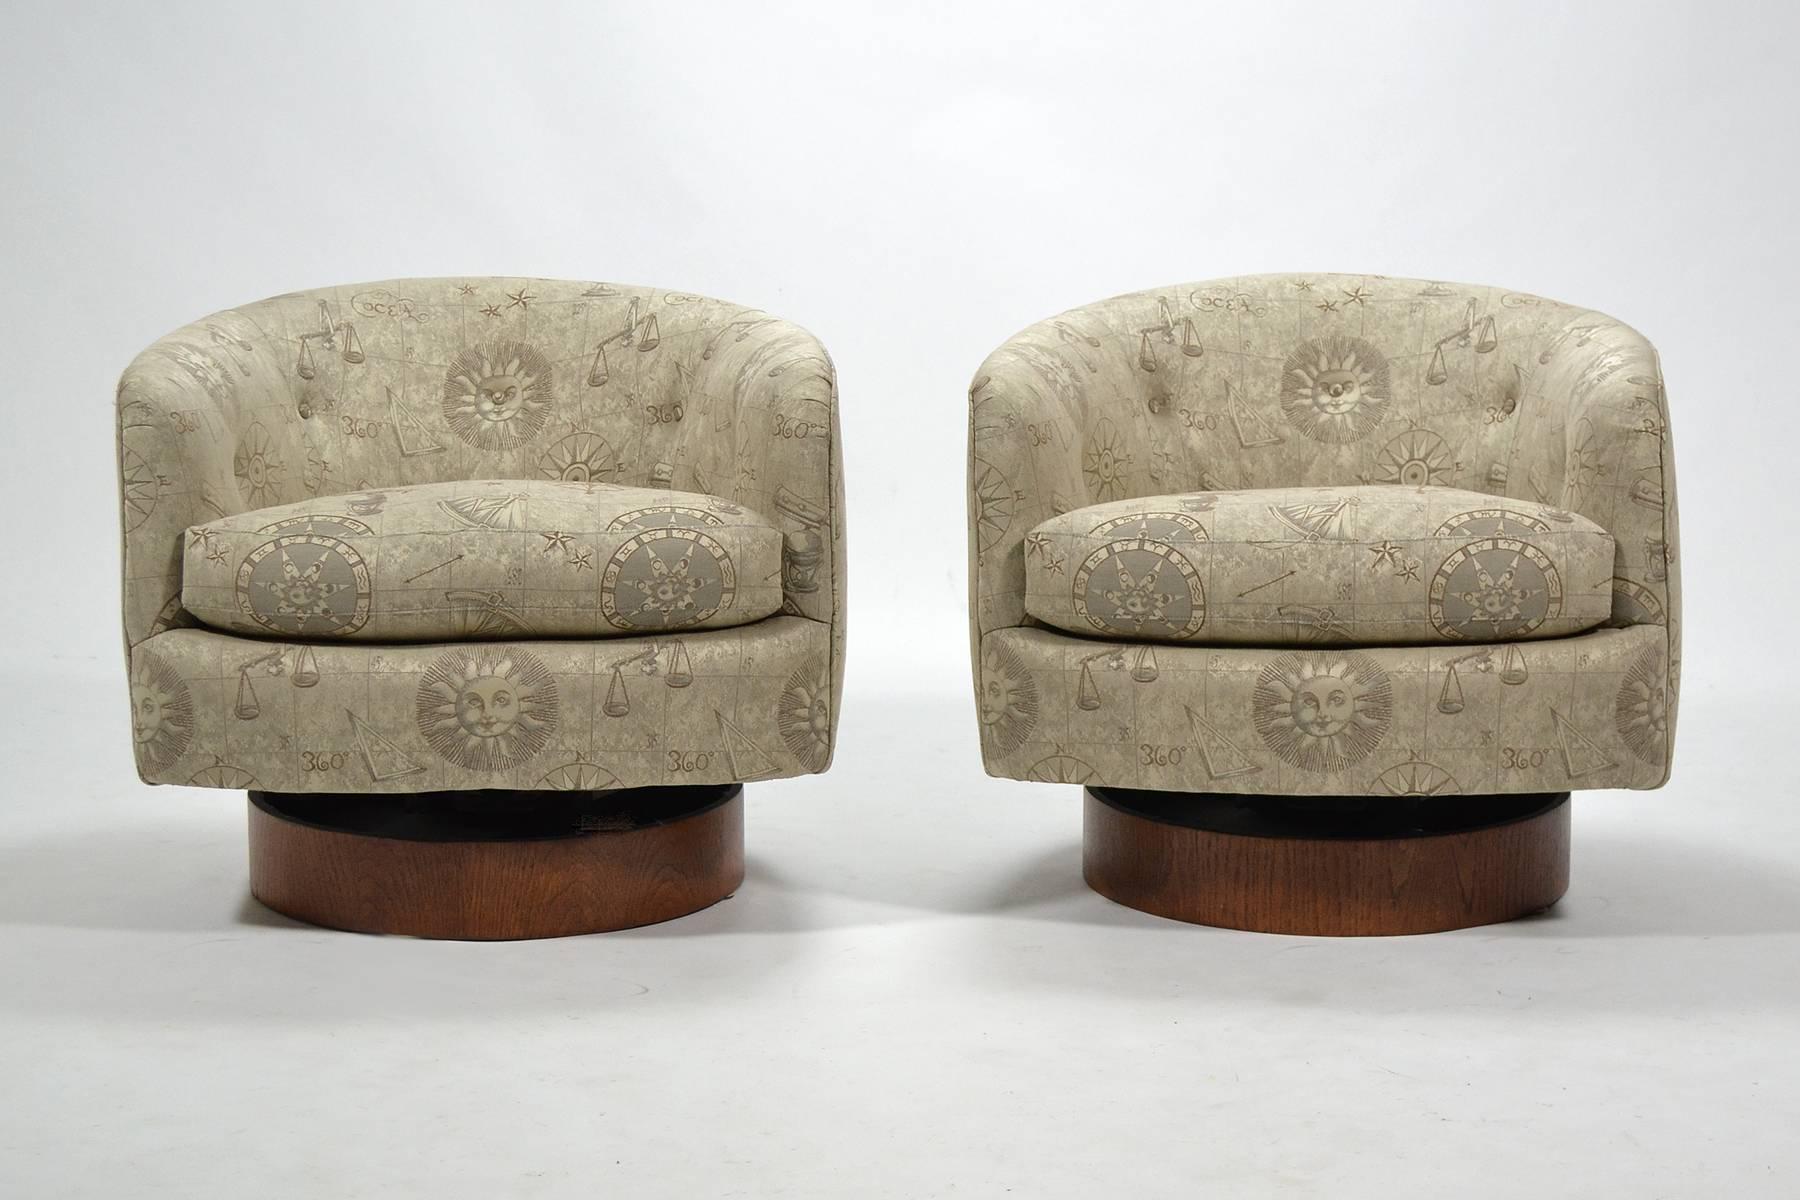 This pair of Baughman lounge chairs are very comfortable with their swivel and tilt function. The barrel back forms sit atop cylindrical walnut bases. They are upholstered in a zodiac-themed fabric which reminds us of Fornasetti.